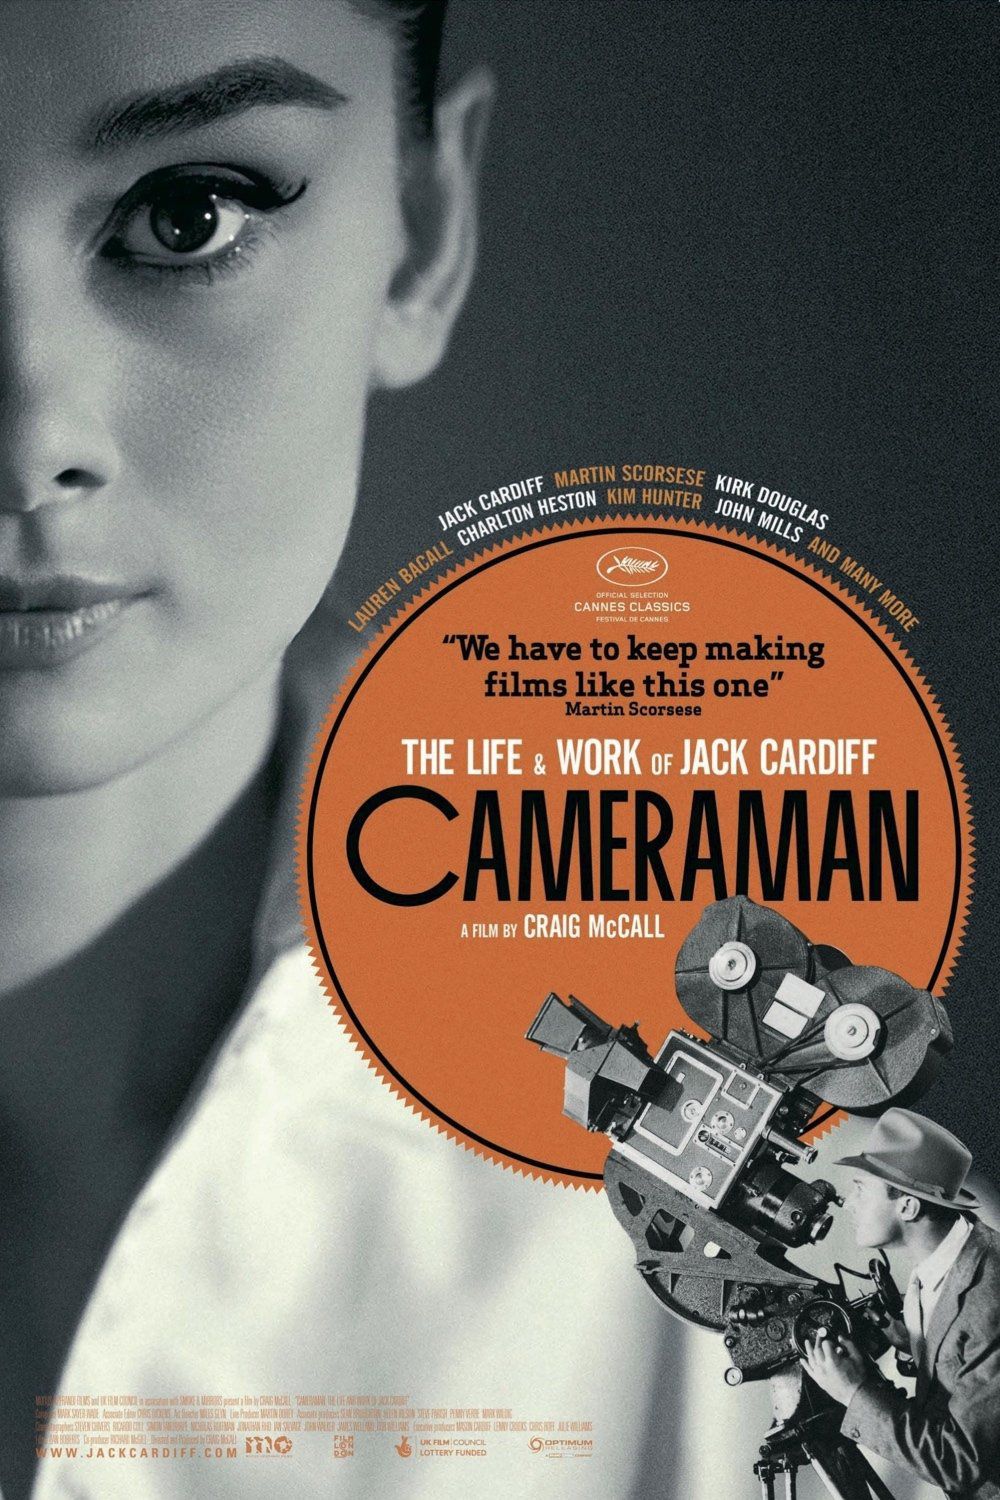 Voir Film Cameraman: The Life and Work of Jack Cardiff - Documentaire (2010) streaming VF gratuit complet